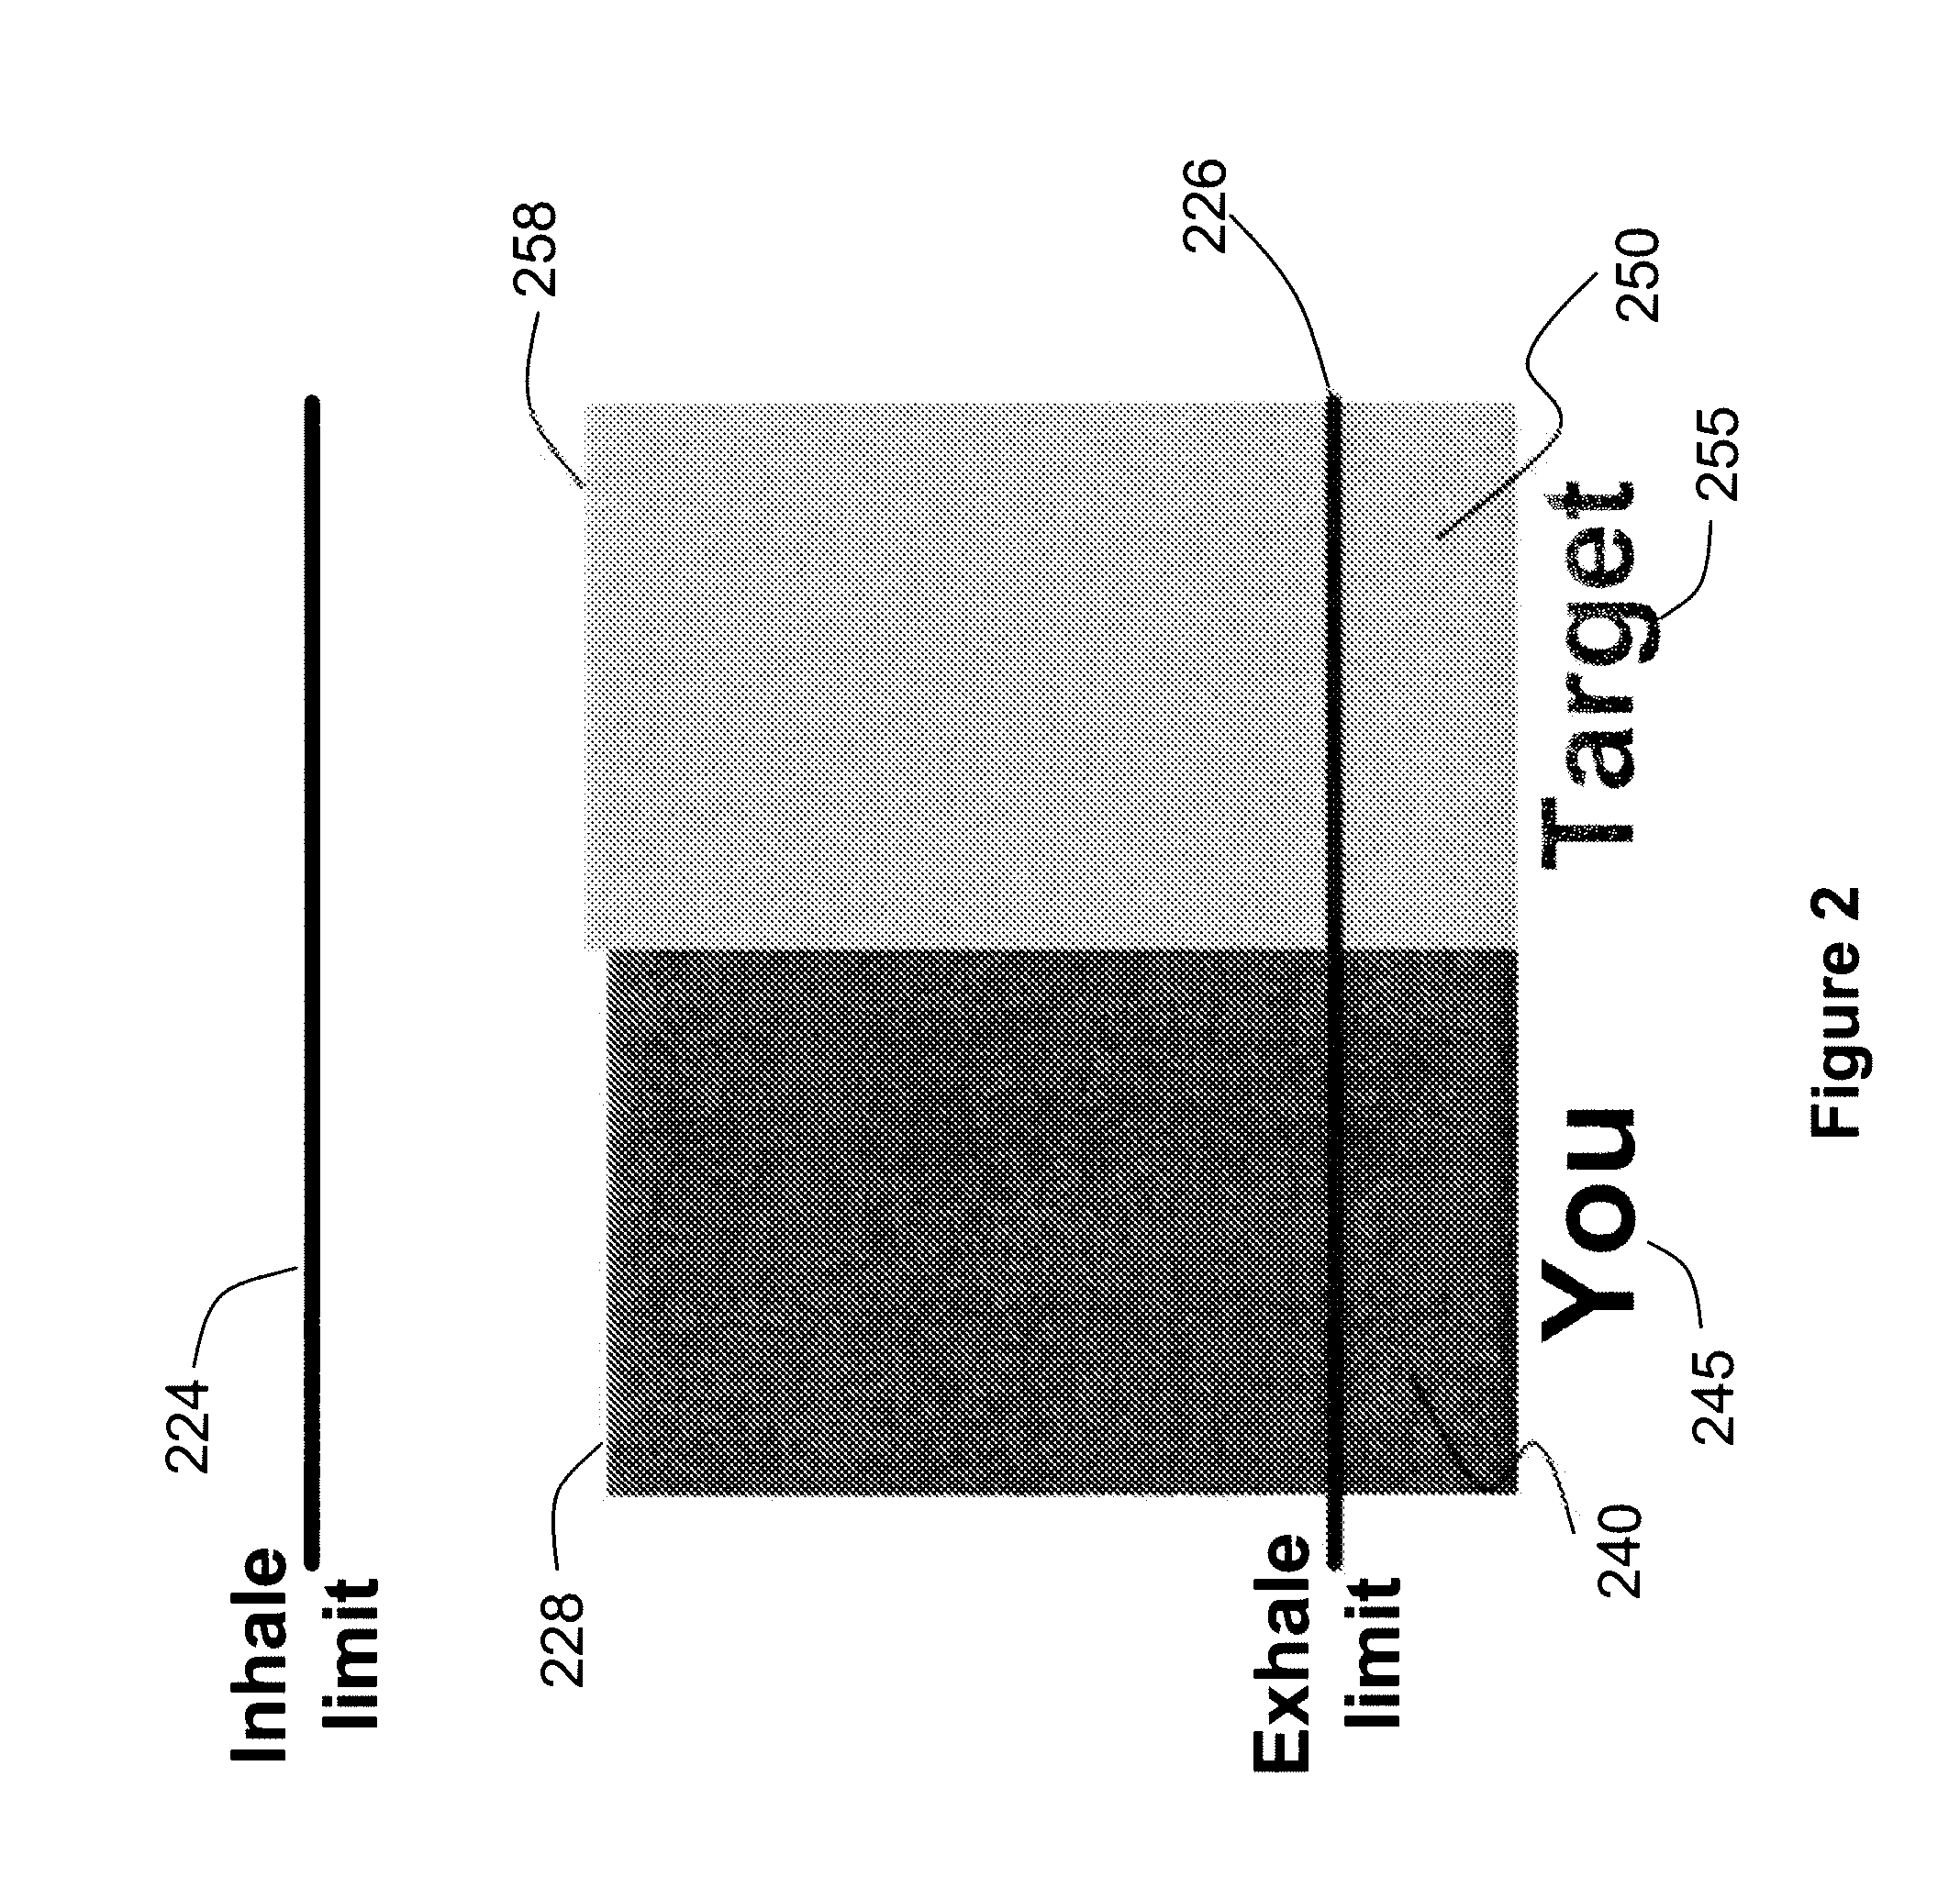 Method and apparatus for respiratory audio-visual biofeedback for imaging and radiotherapy